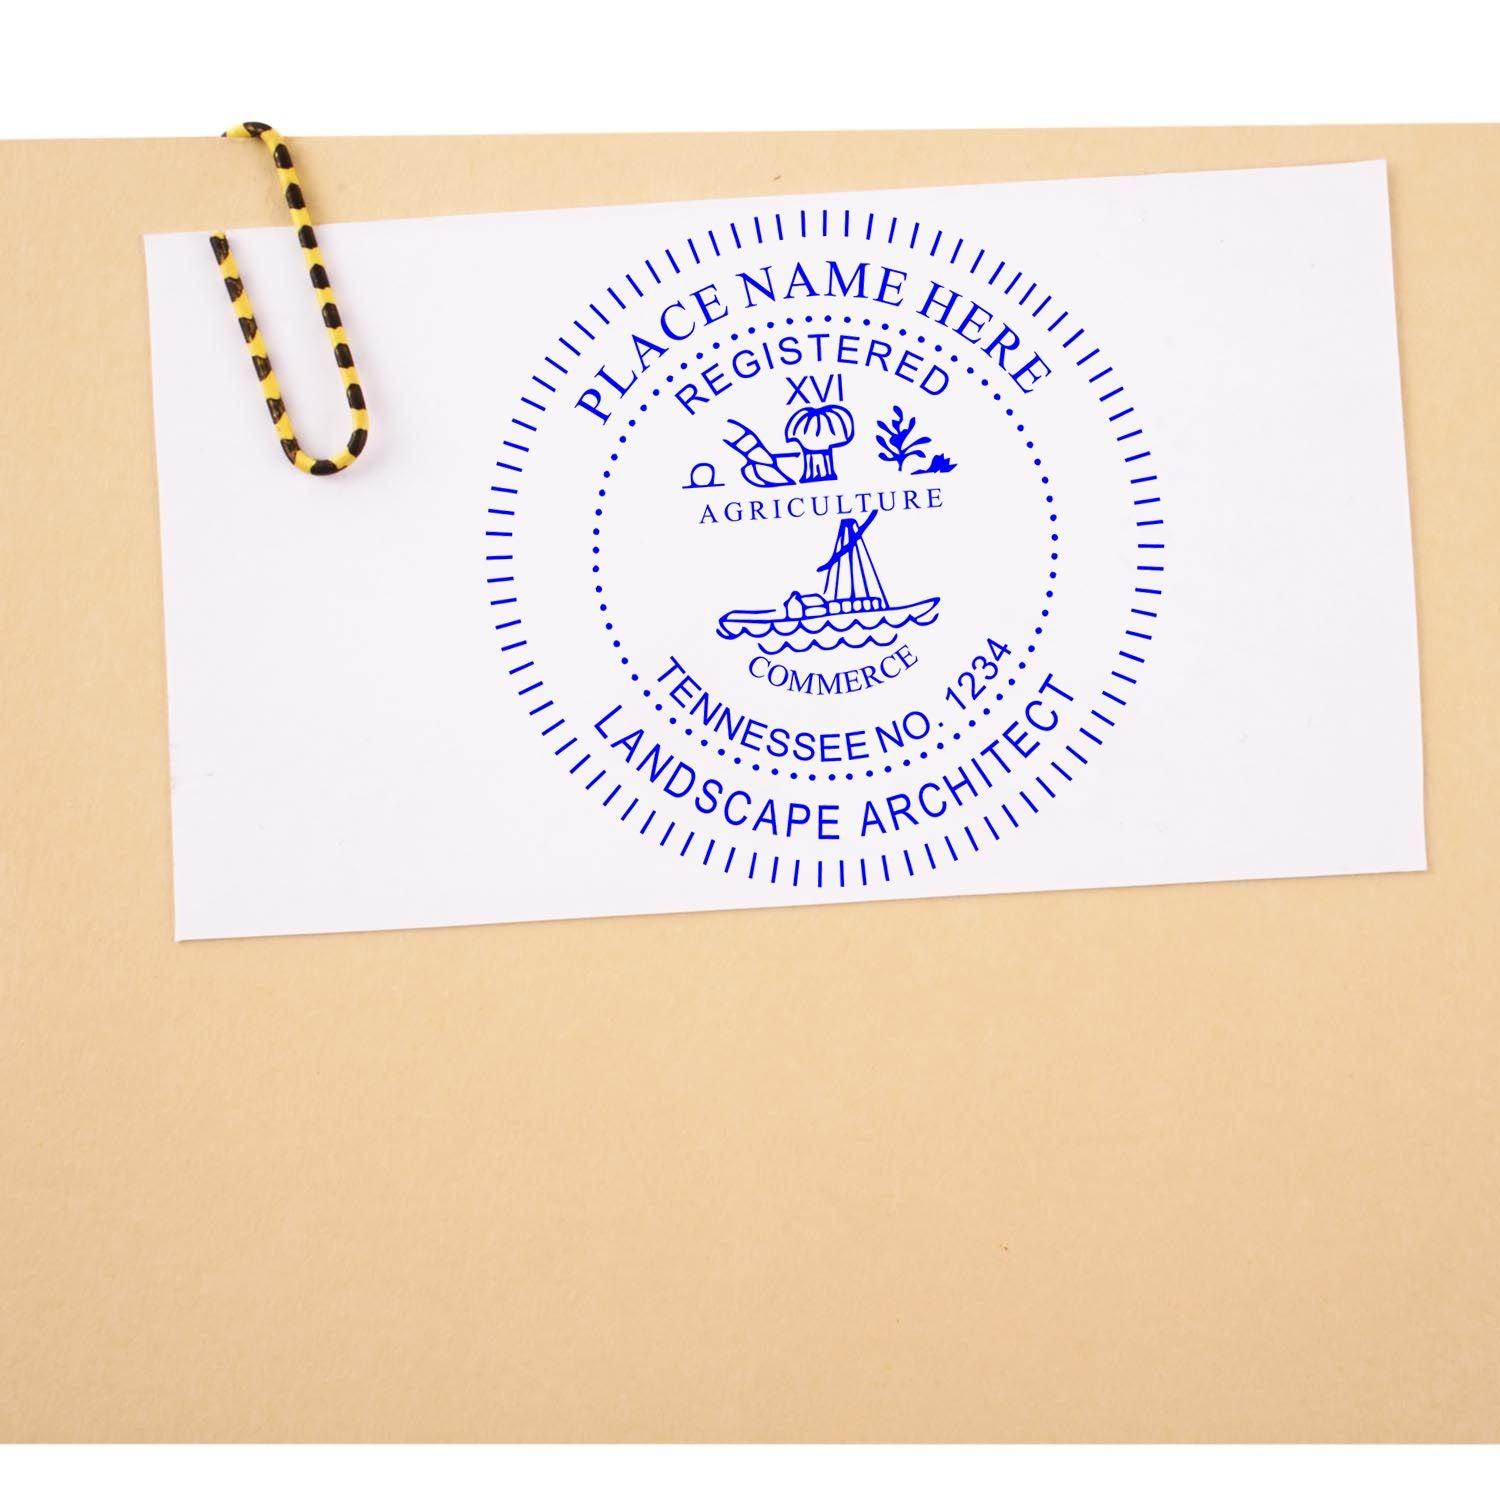 The main image for the Premium MaxLight Pre-Inked Tennessee Landscape Architectural Stamp depicting a sample of the imprint and electronic files